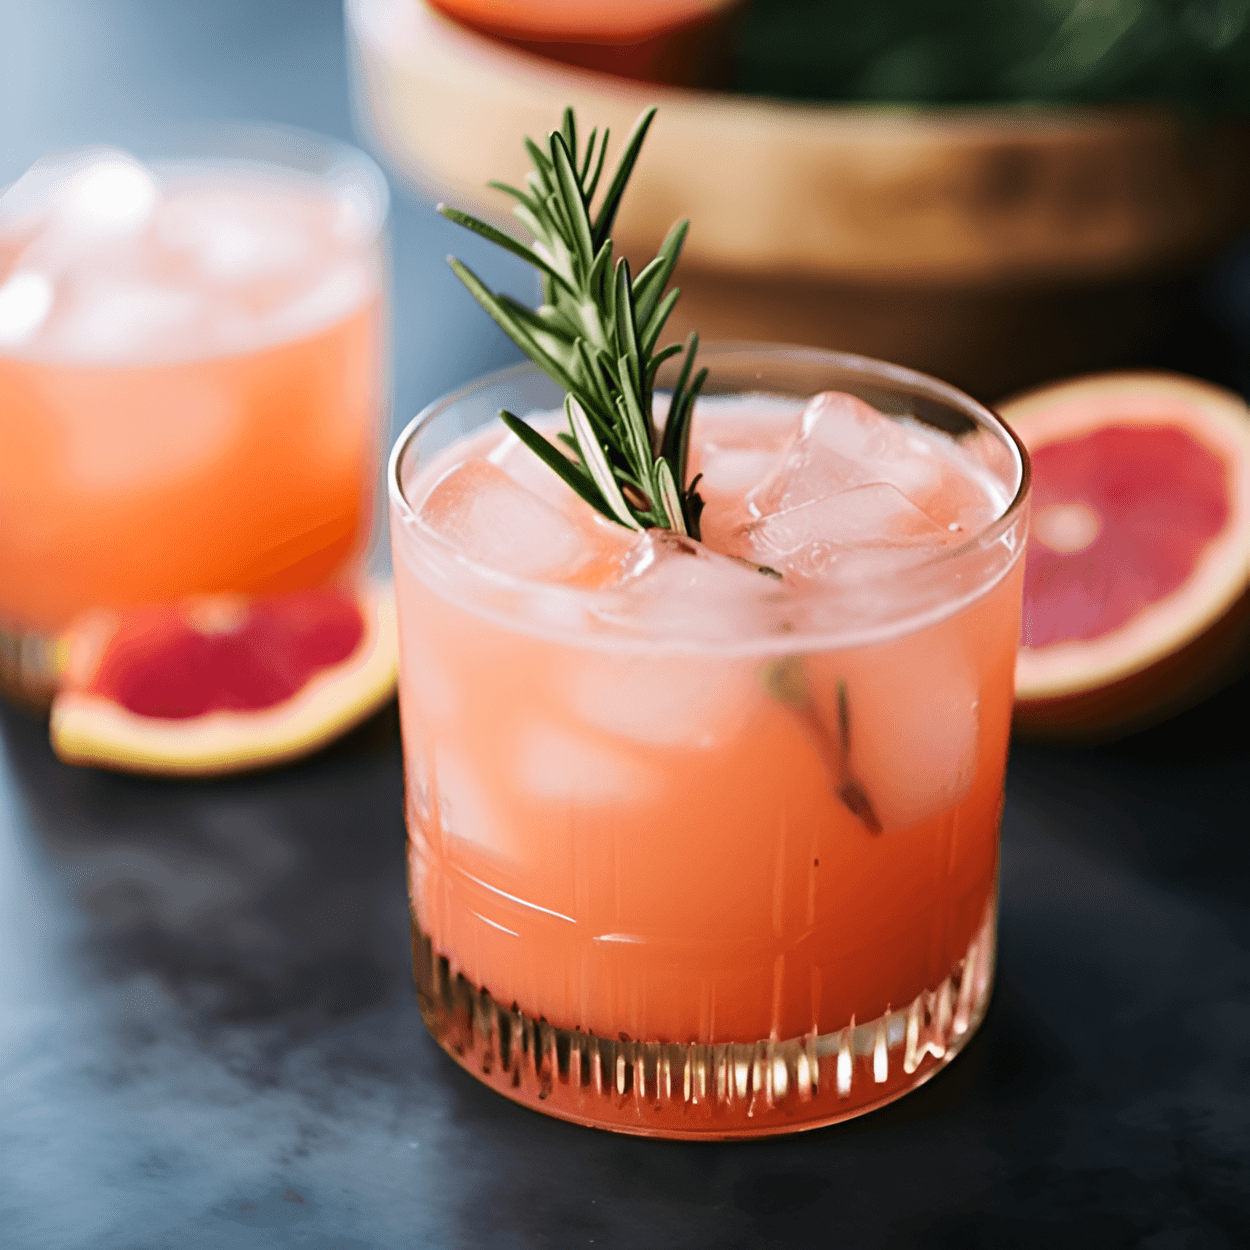 Rosemary Grapefruit Mule Cocktail Recipe - The Rosemary Grapefruit Mule is a cocktail with a complex flavor profile. It's tangy and tart from the grapefruit, slightly sweet from the ginger beer, and has an earthy undertone from the rosemary. The vodka gives it a strong kick, making it a cocktail that's both refreshing and invigorating.